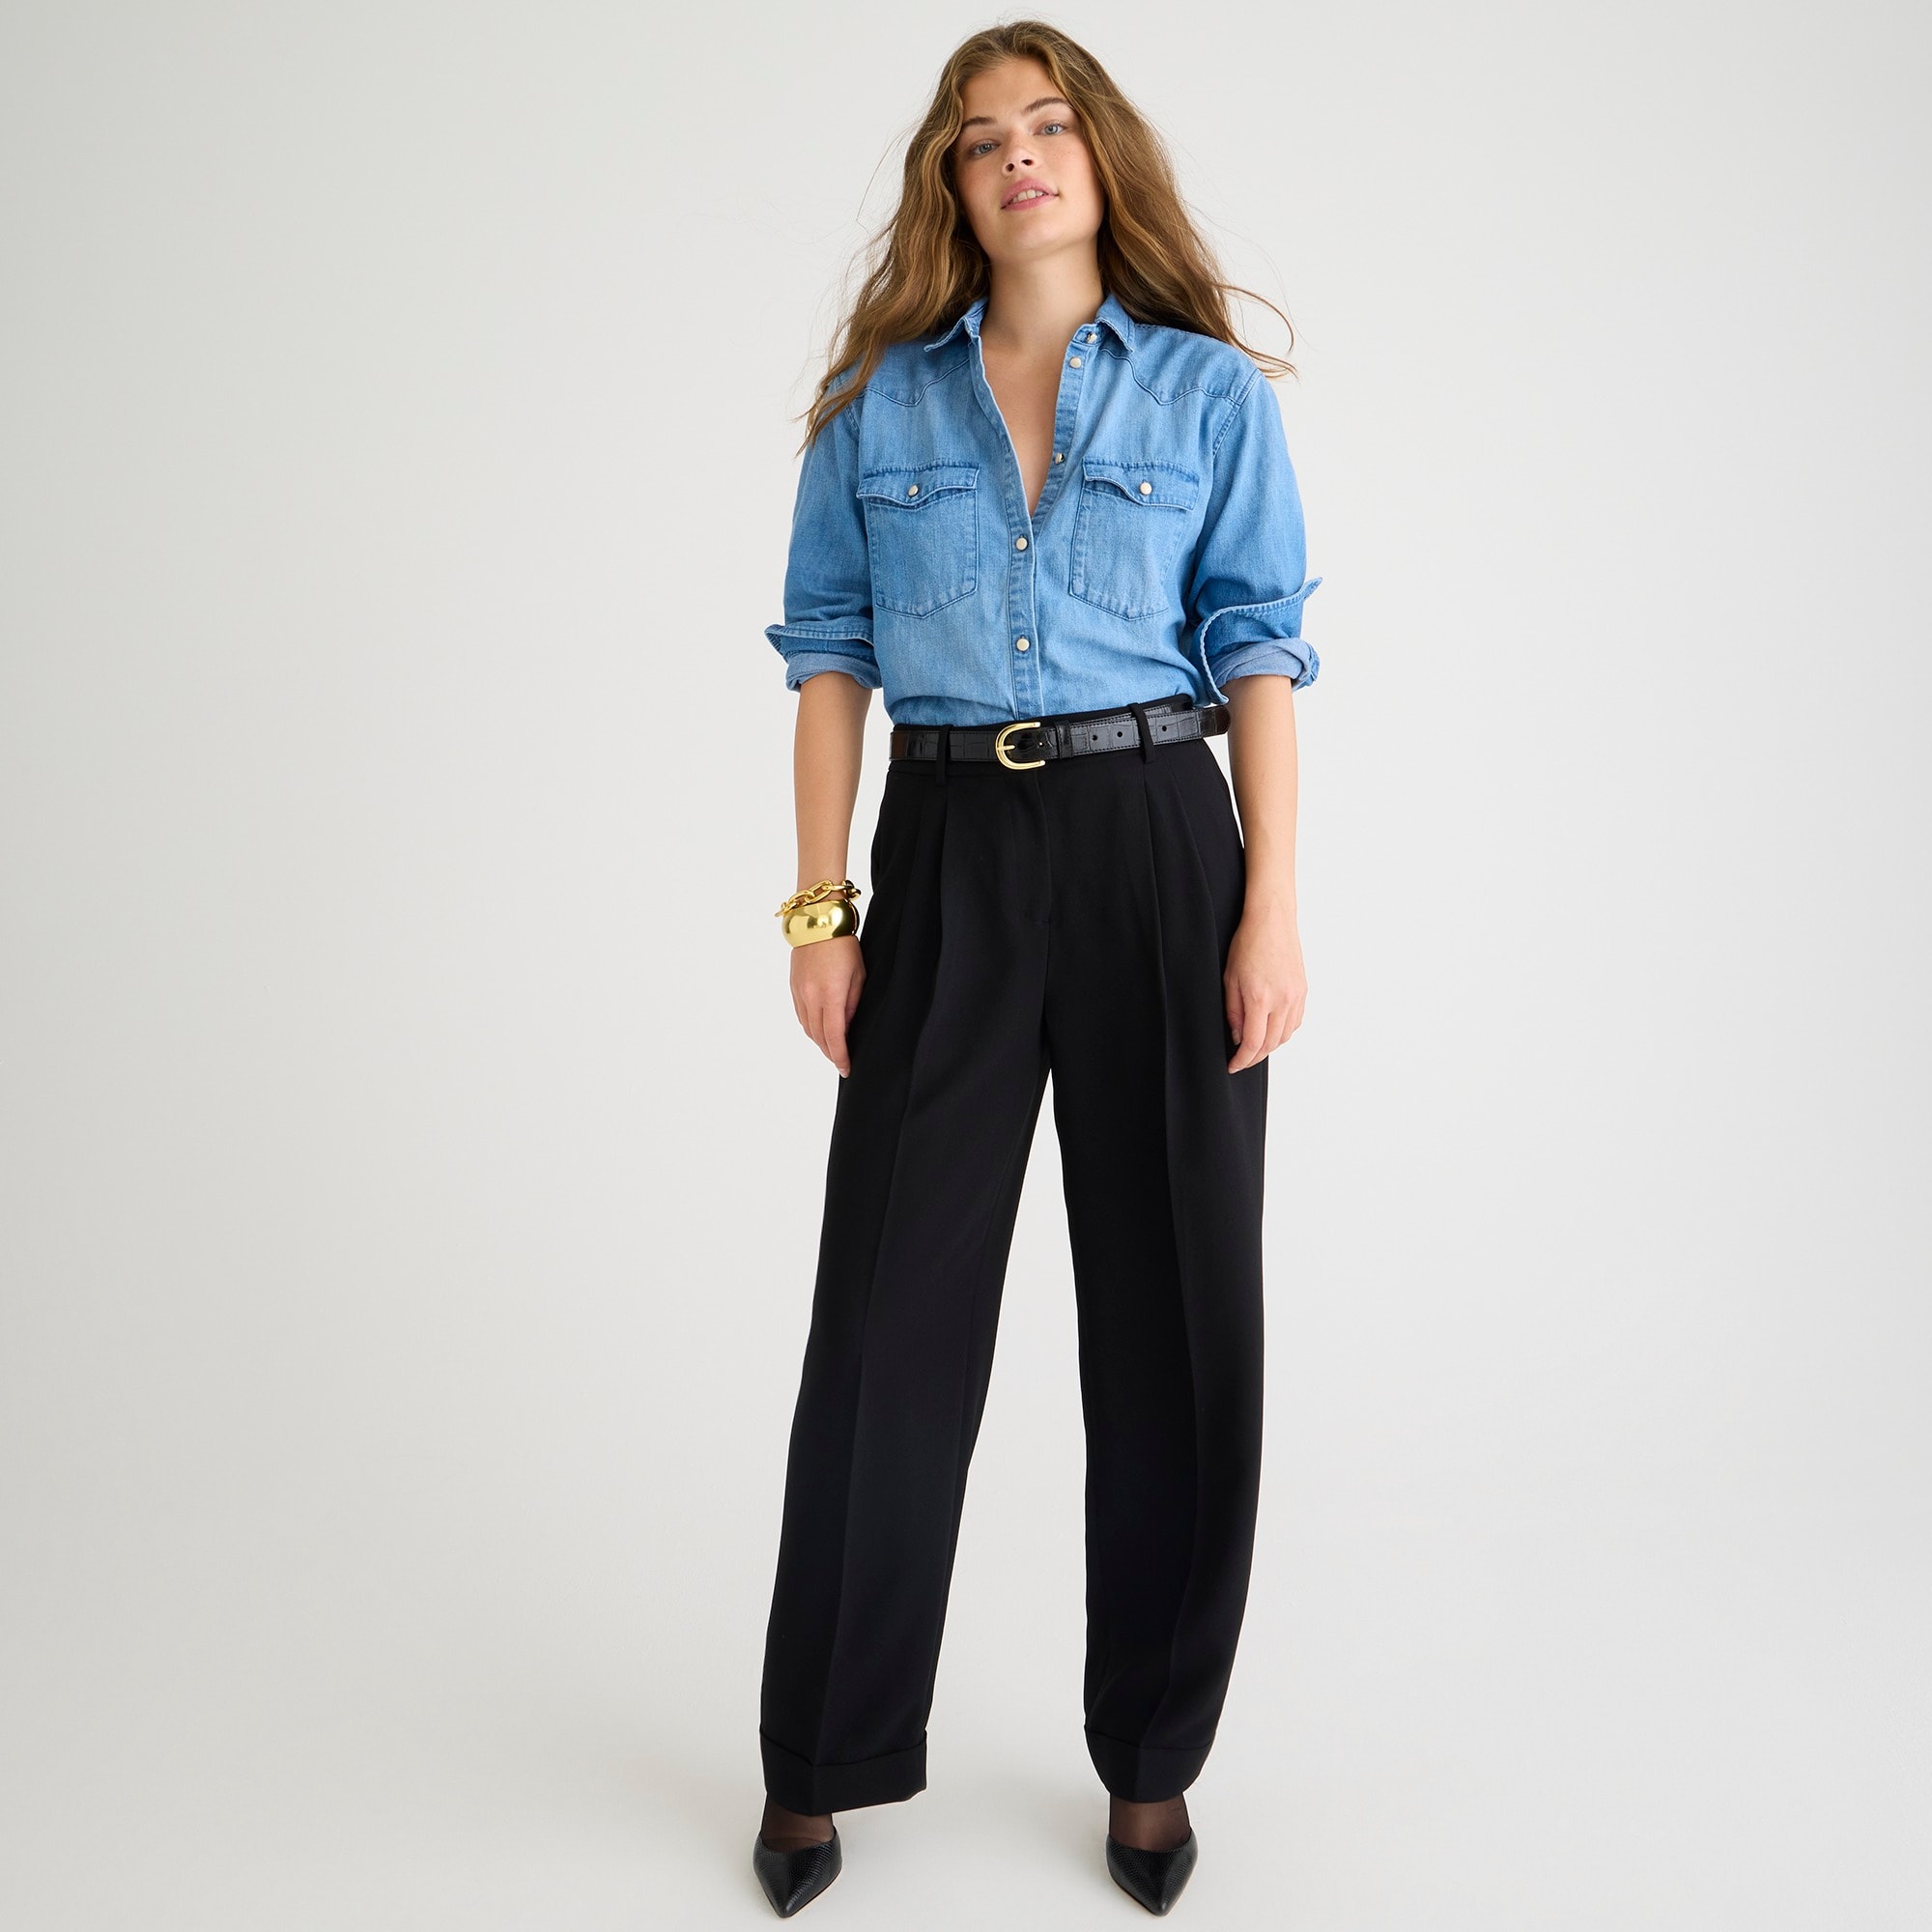 womens Wide-leg essential pant in city crepe